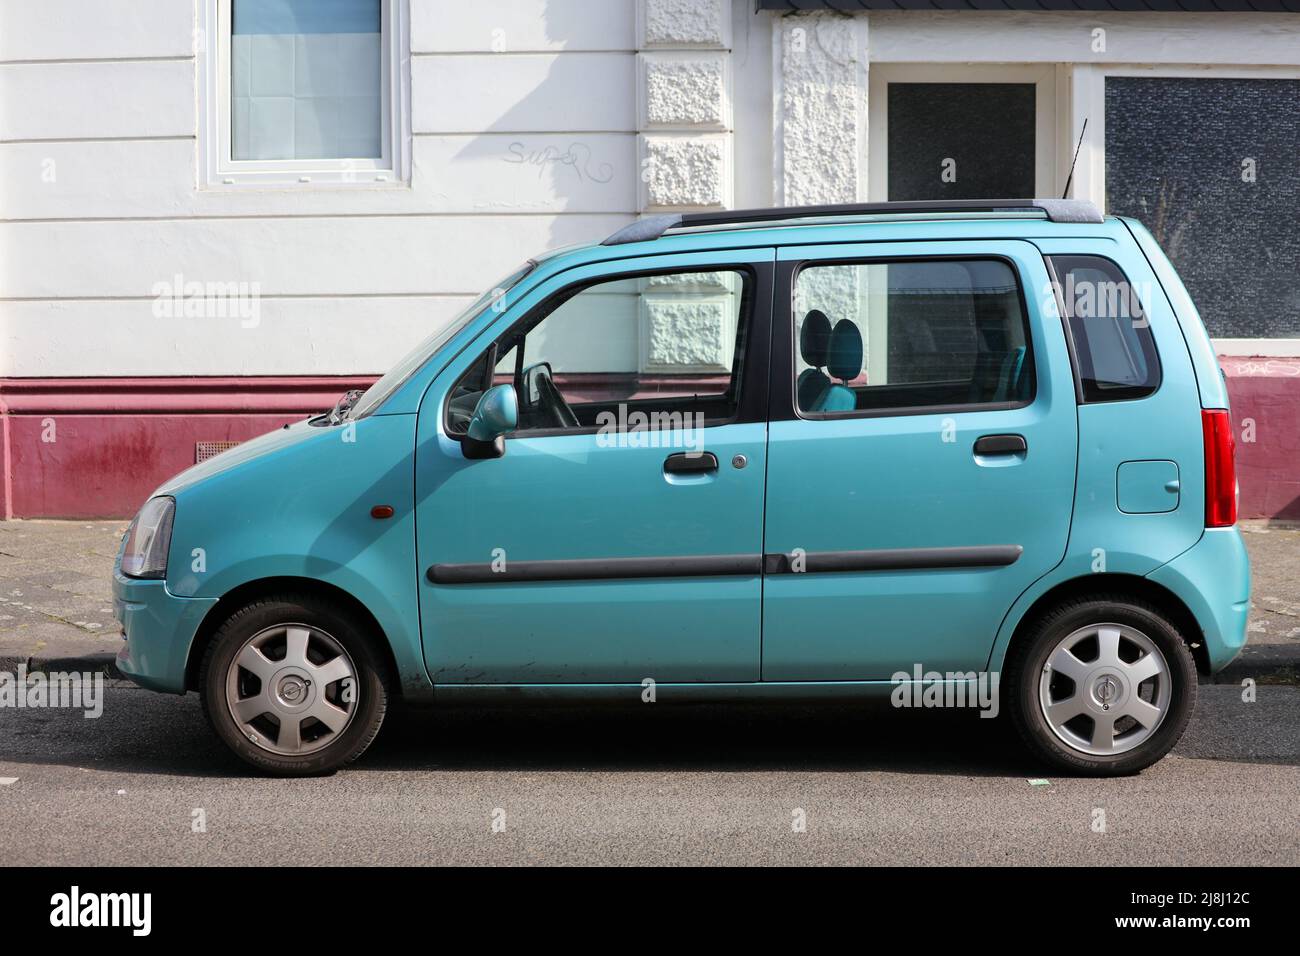 NORTH RHINE-WESTPHALIA, GERMANY - SEPTEMBER 16, 2020: Opel Agila microvan  city car parked in Germany. There were 45.8 million cars registered in  Germa Stock Photo - Alamy